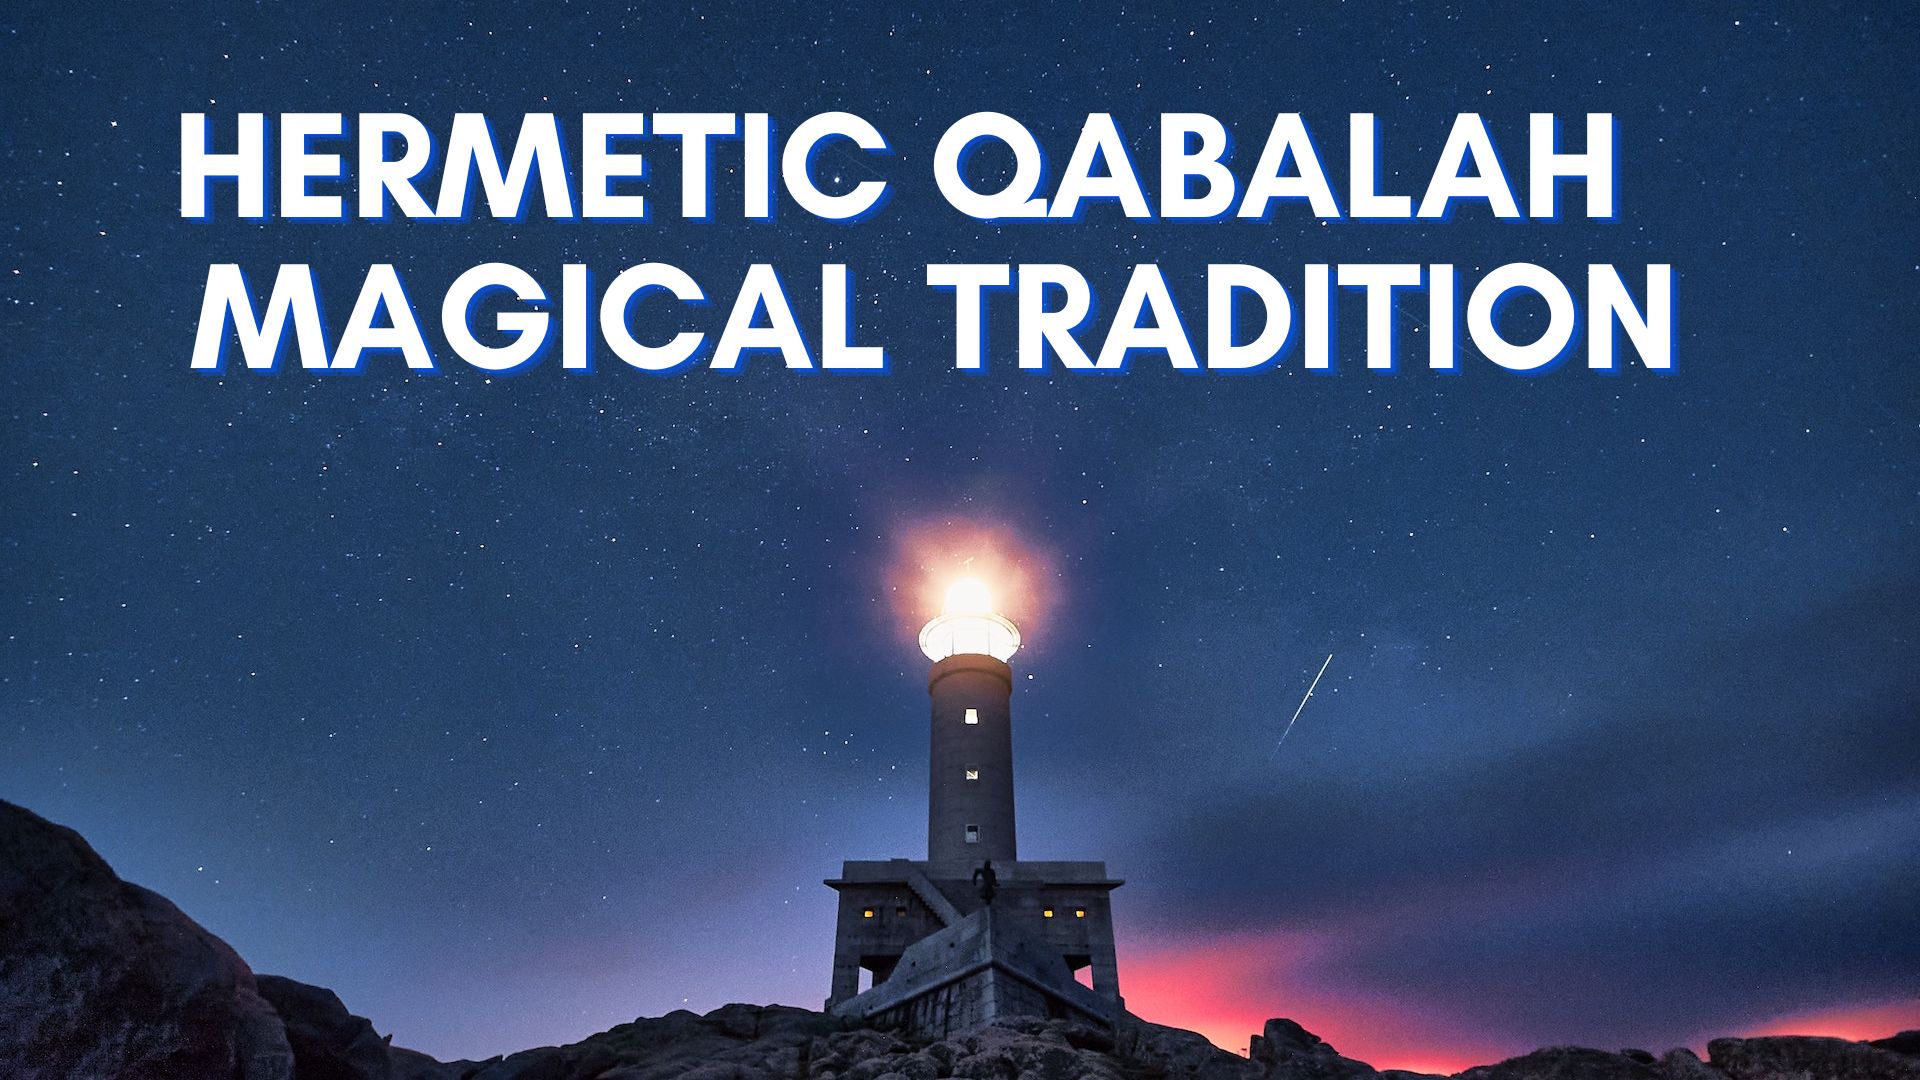 What Is Hermetic Qabalah And Its Magical Tradition?